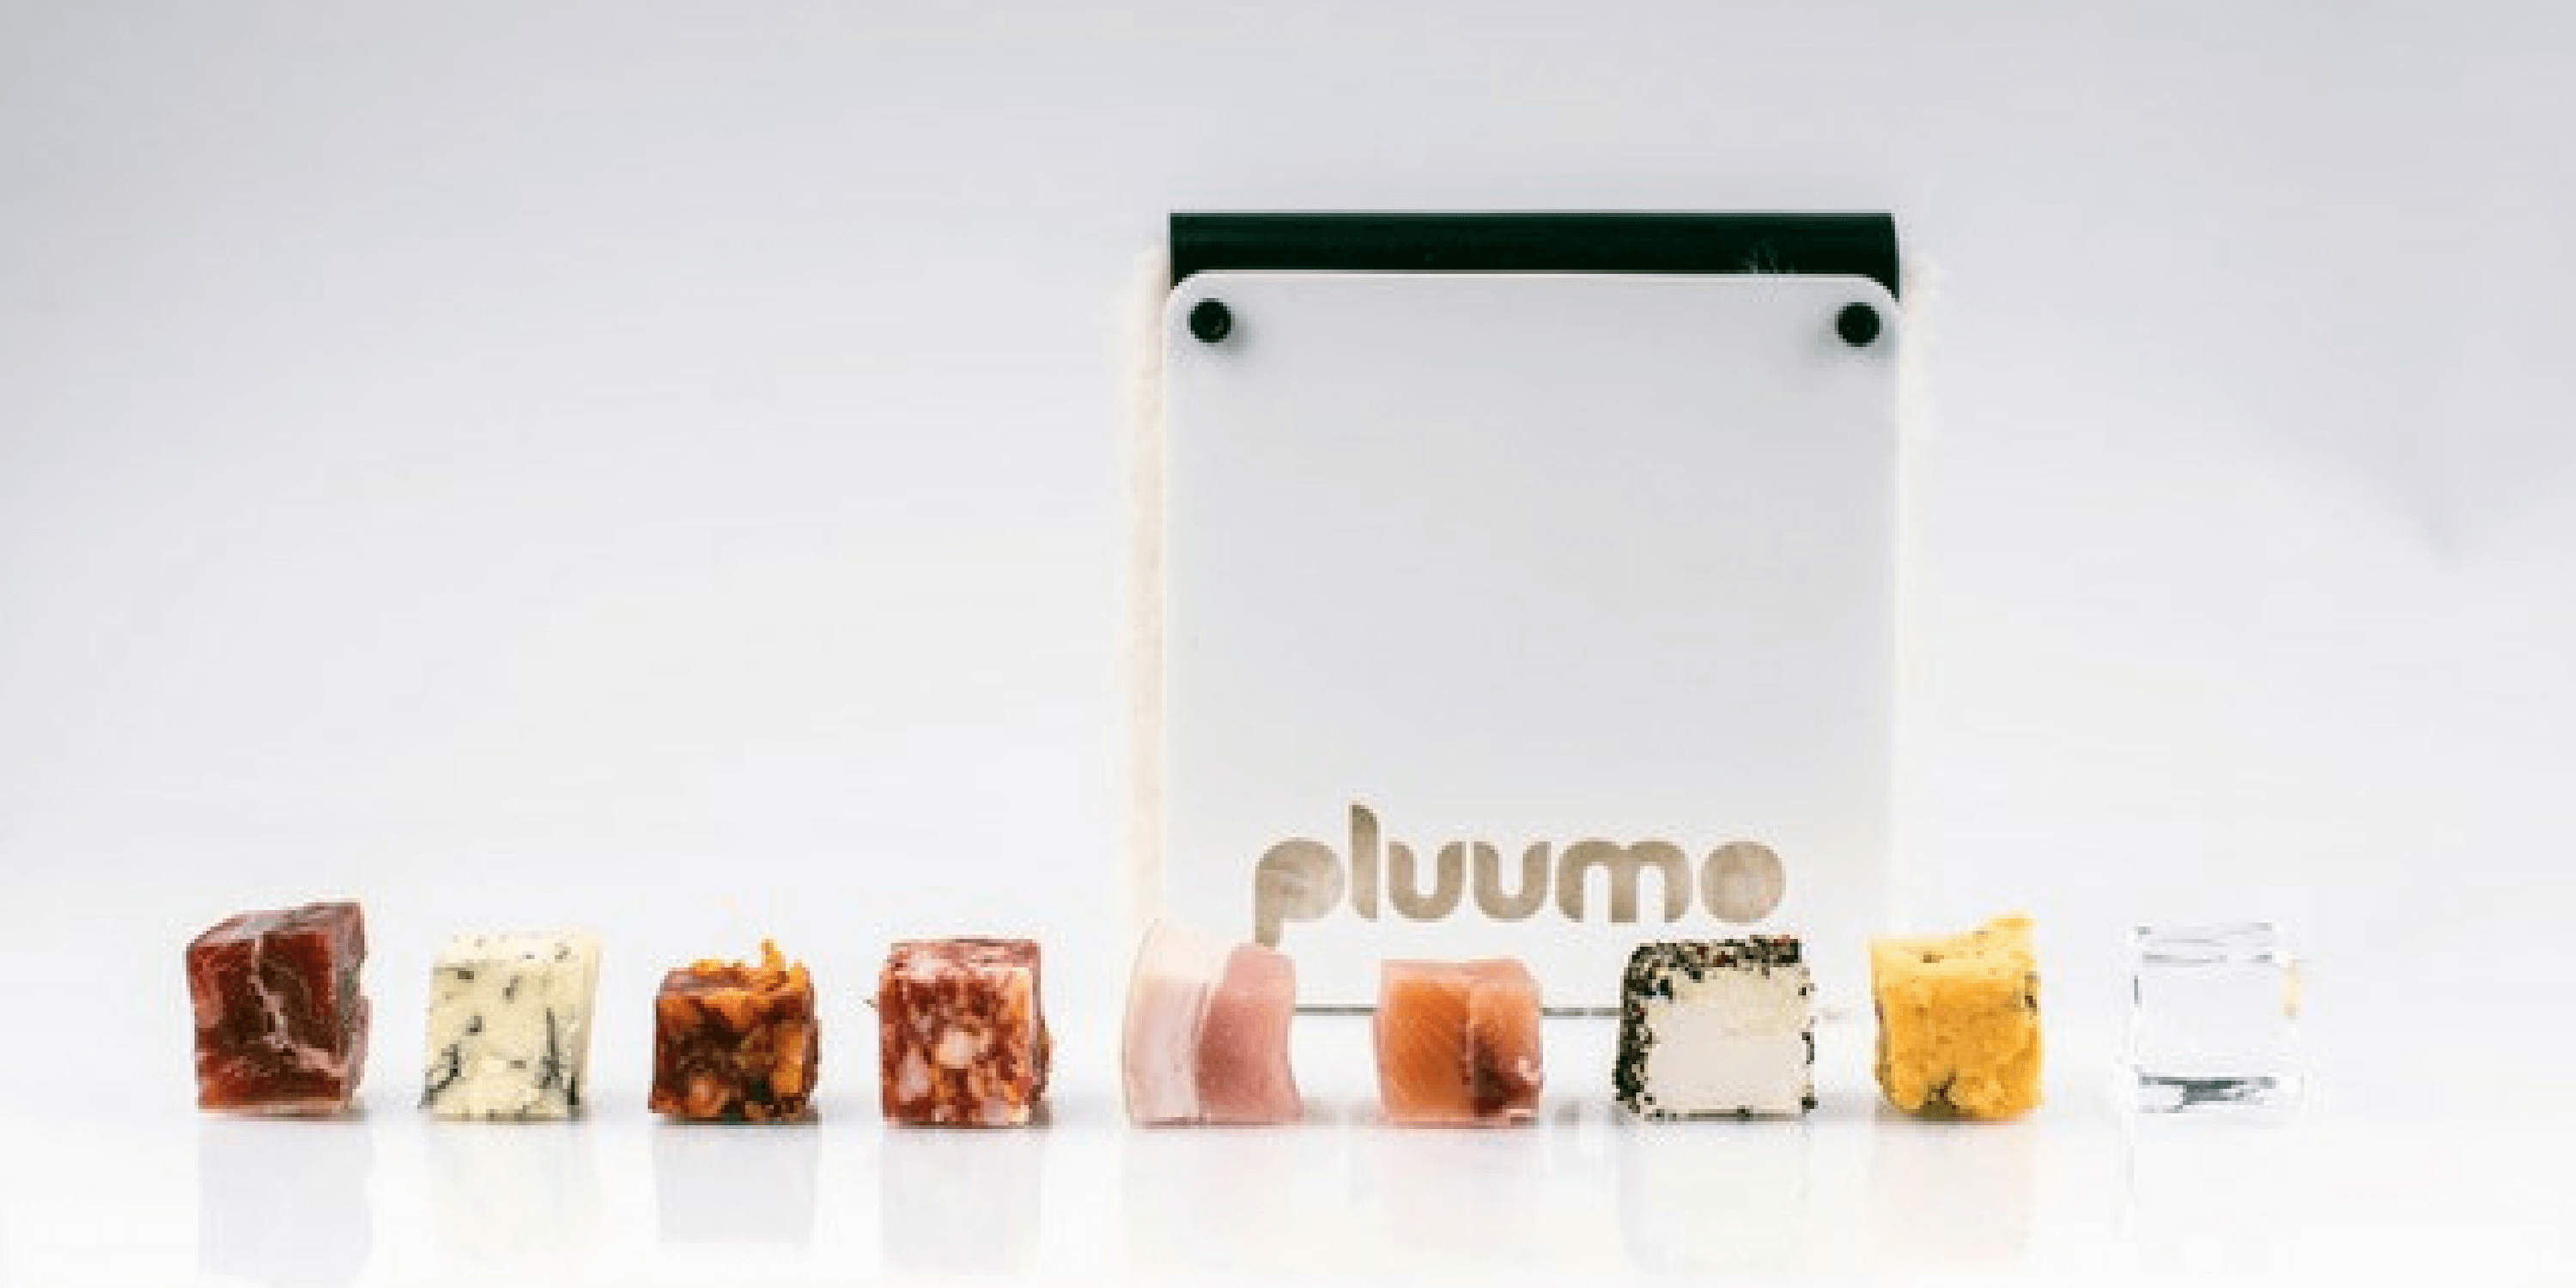 Food products that can be packed in pluumo packaging